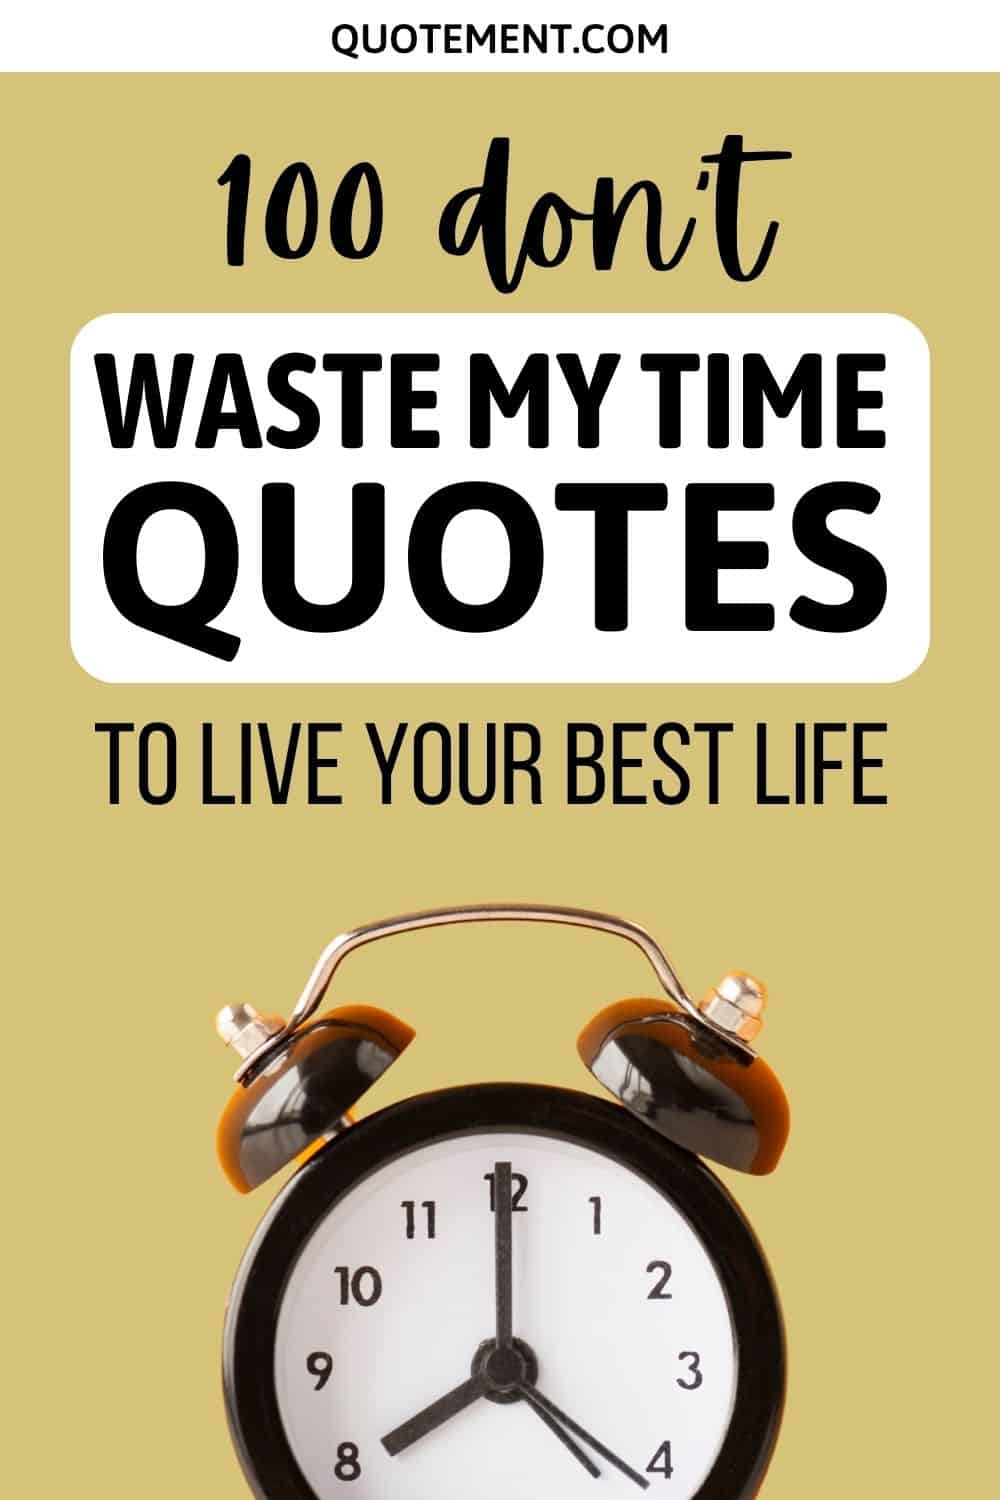 100 Don’t Waste My Time Quotes To Live Your Best Life